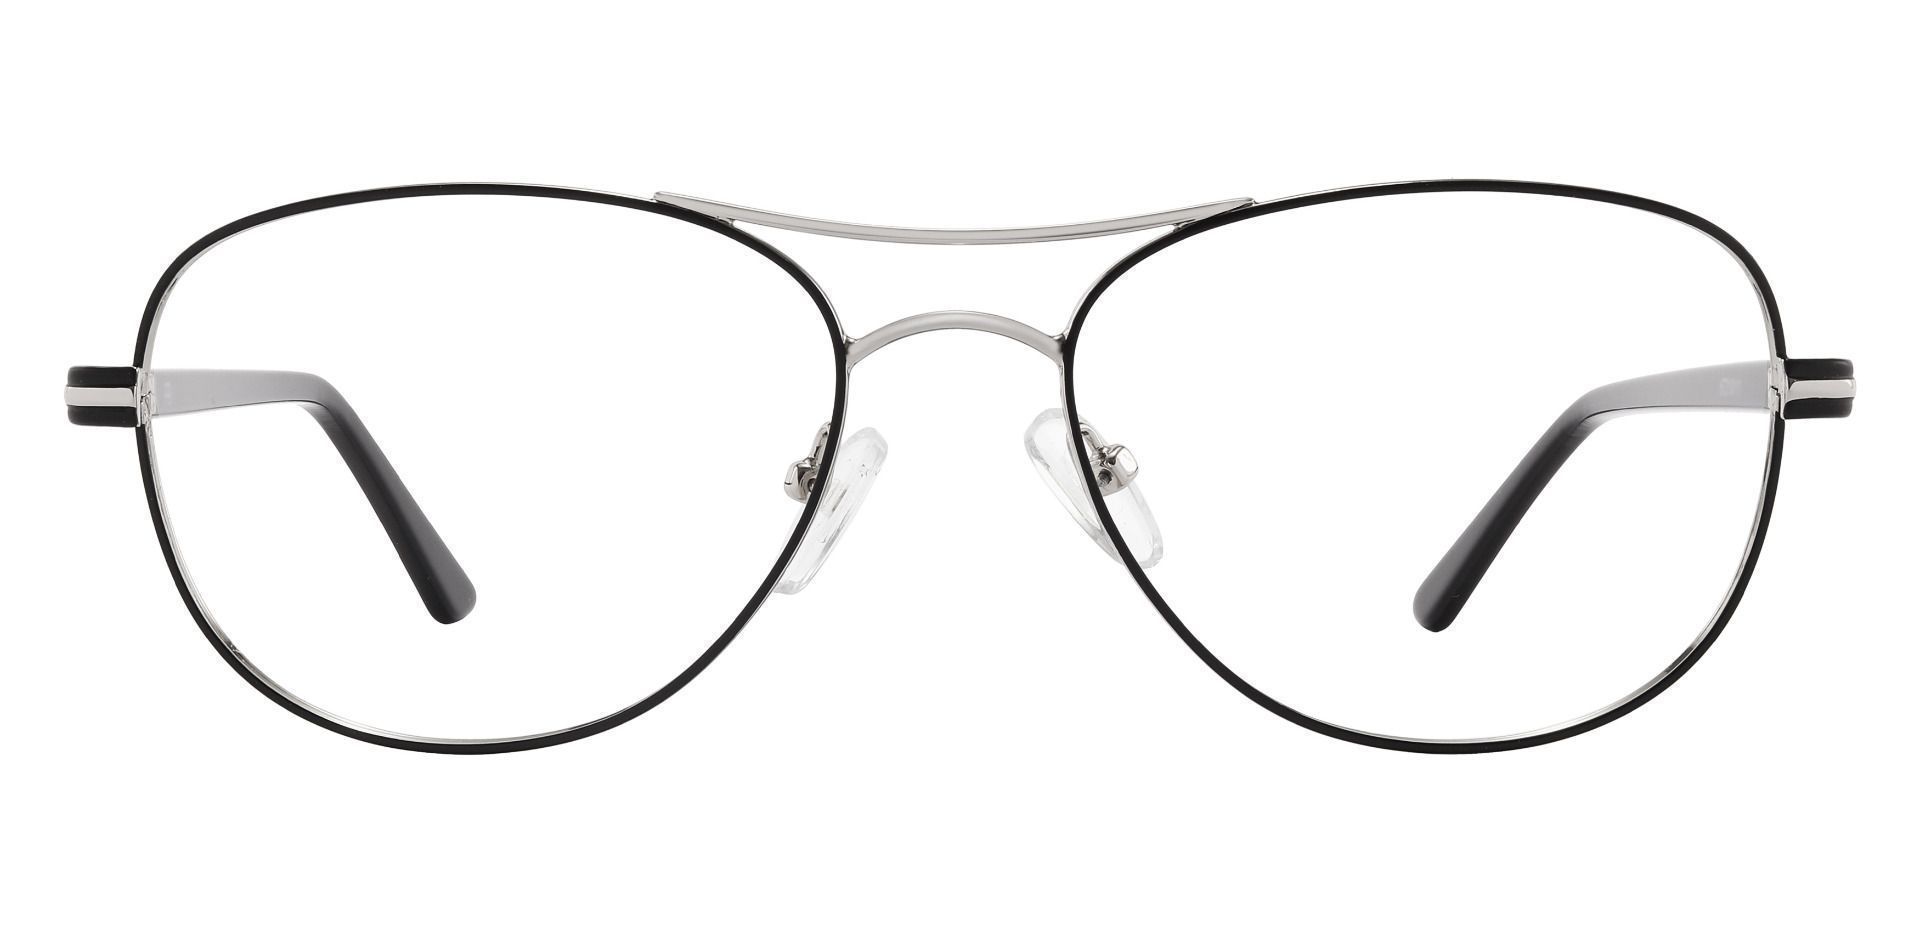 Reeves Aviator Lined Bifocal Glasses - Silver